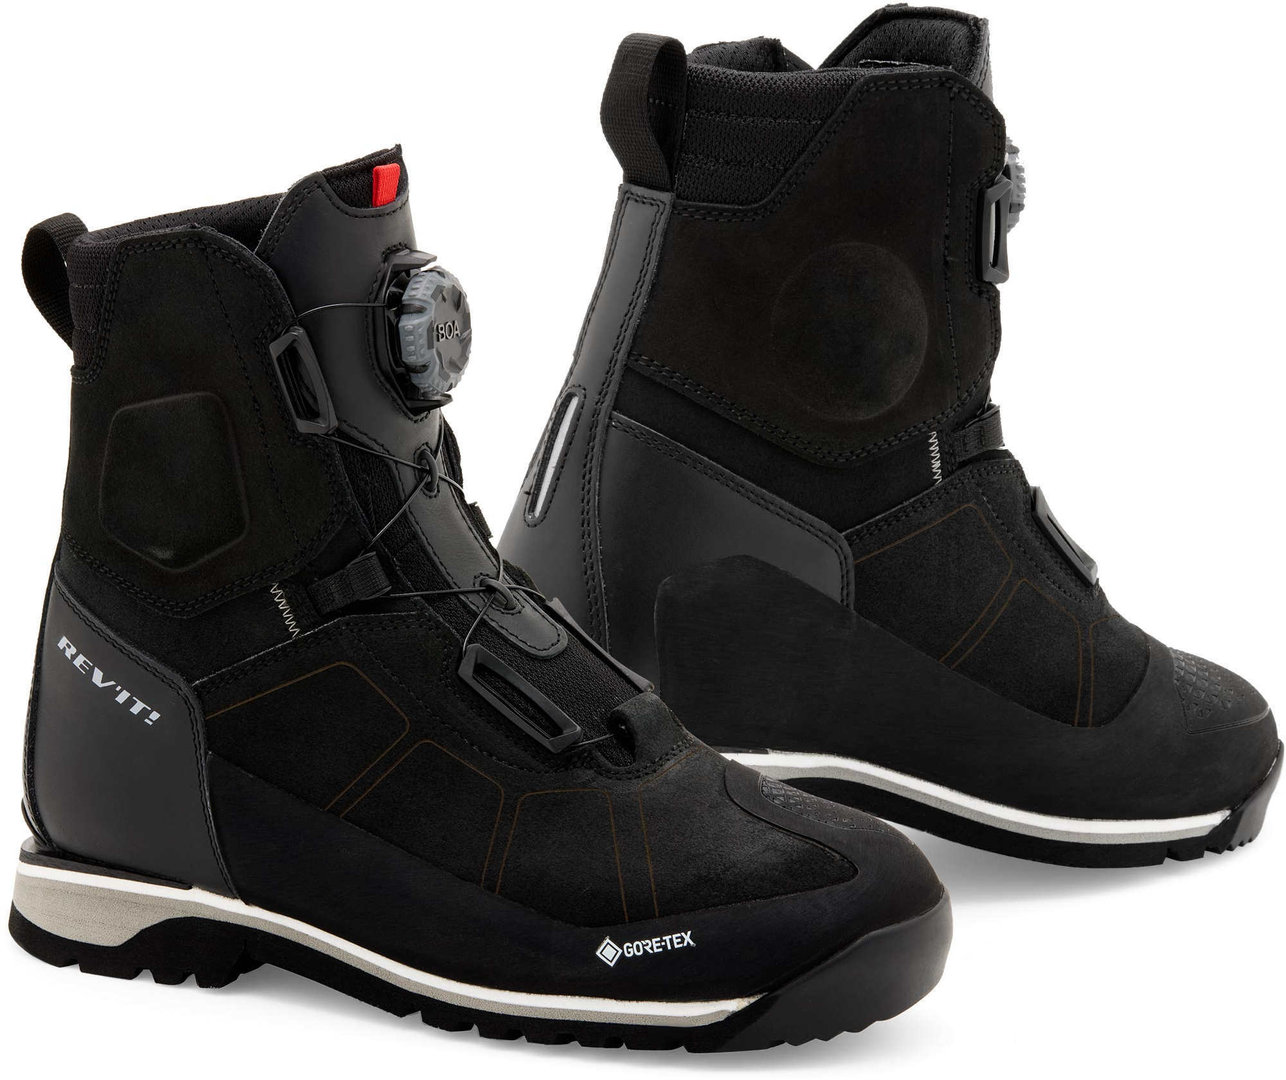 Image of REV'IT! Pioneer GTX Bottes Noir Taille 40